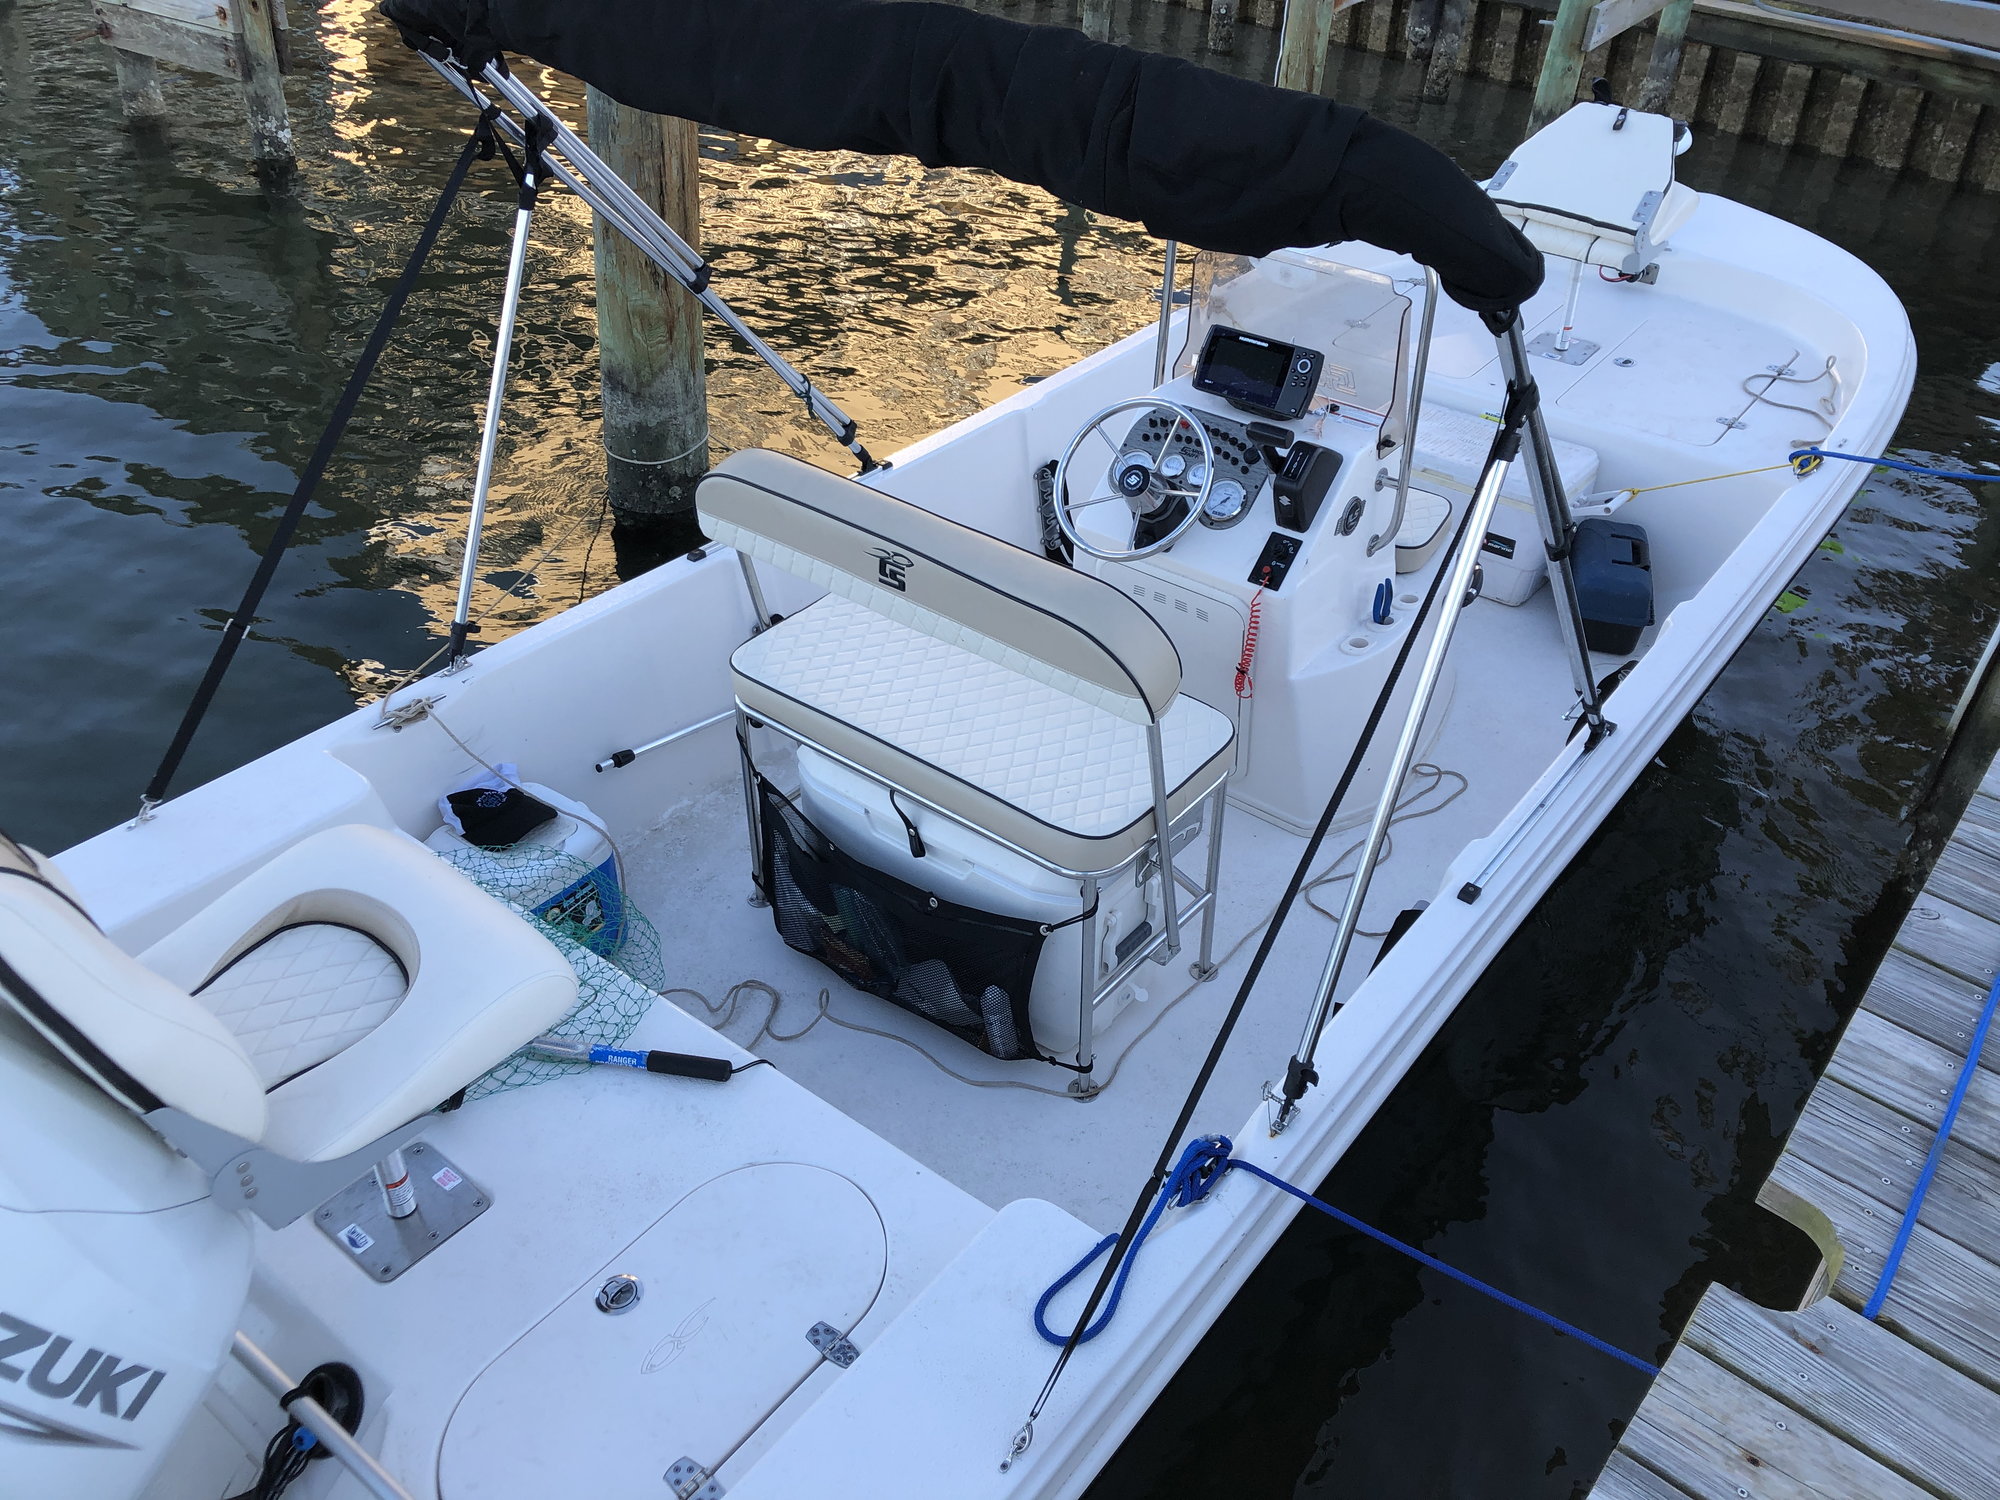 Best way to mount rod holders on 15' aluminum boat?